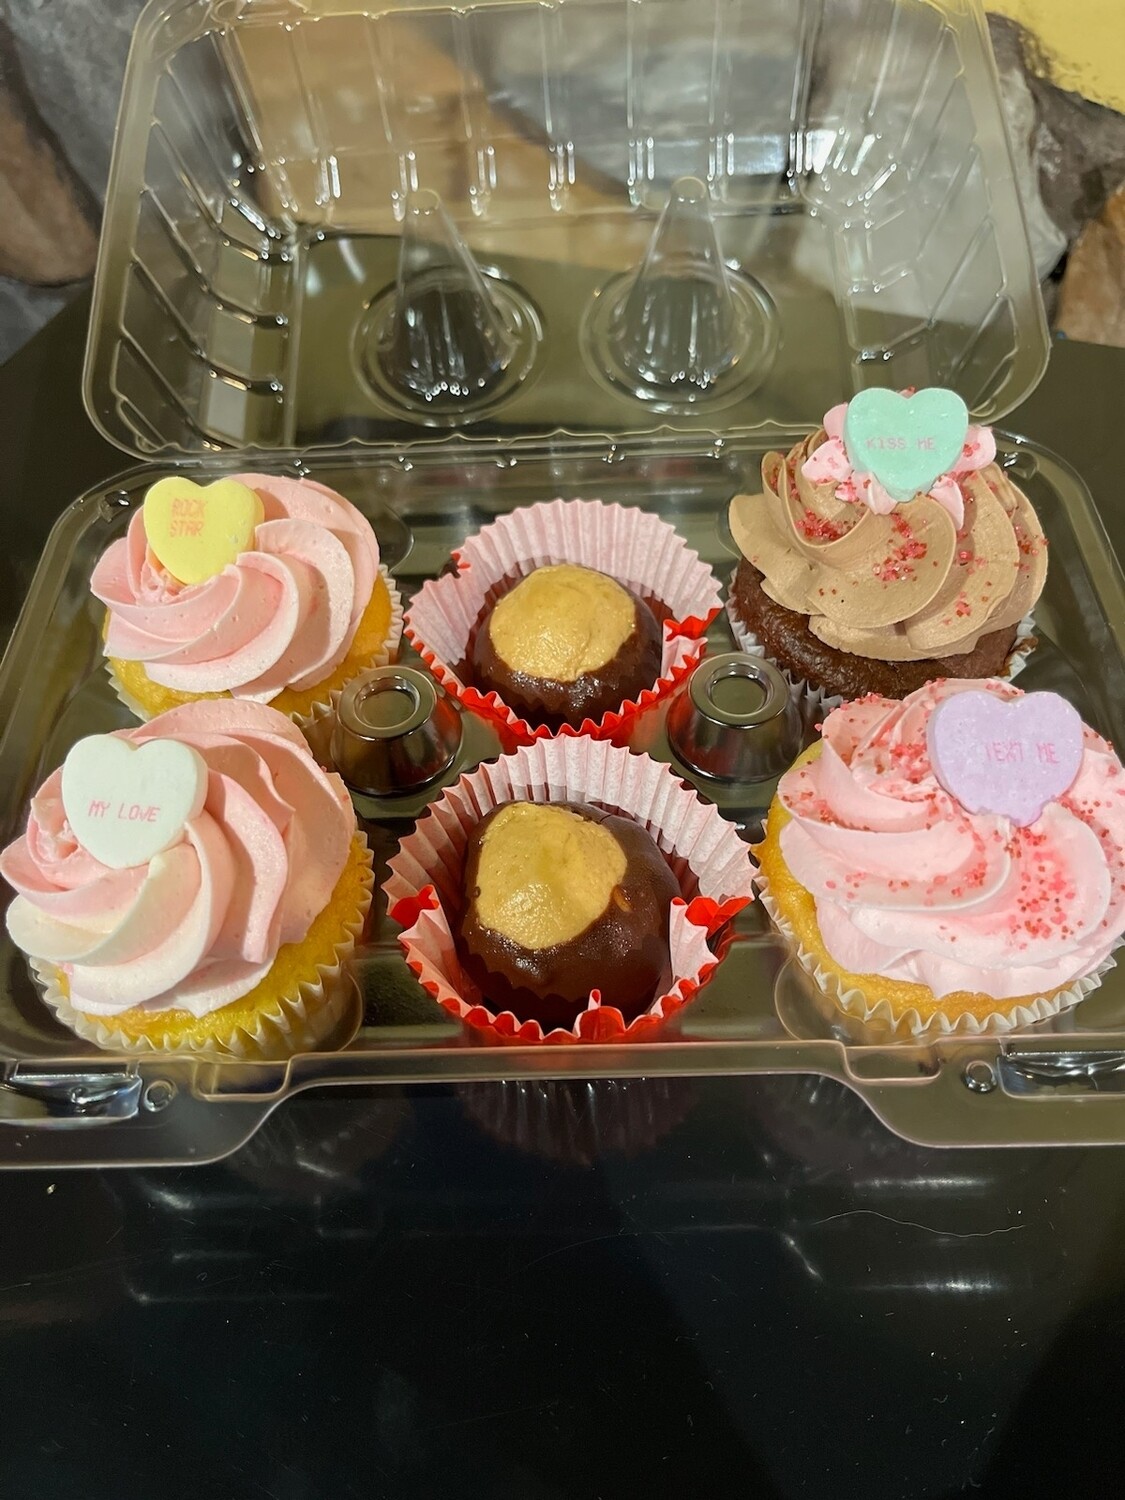 VALENTINE'S DAY 6 COUNT - SMOOCHIE PACK - In-Store Pickup - 
2 Sweet Caroline, 1 Classic Chocolate & 1 Classic Vanilla Cupcakes + 2 Hand-Dipped Buckeyes